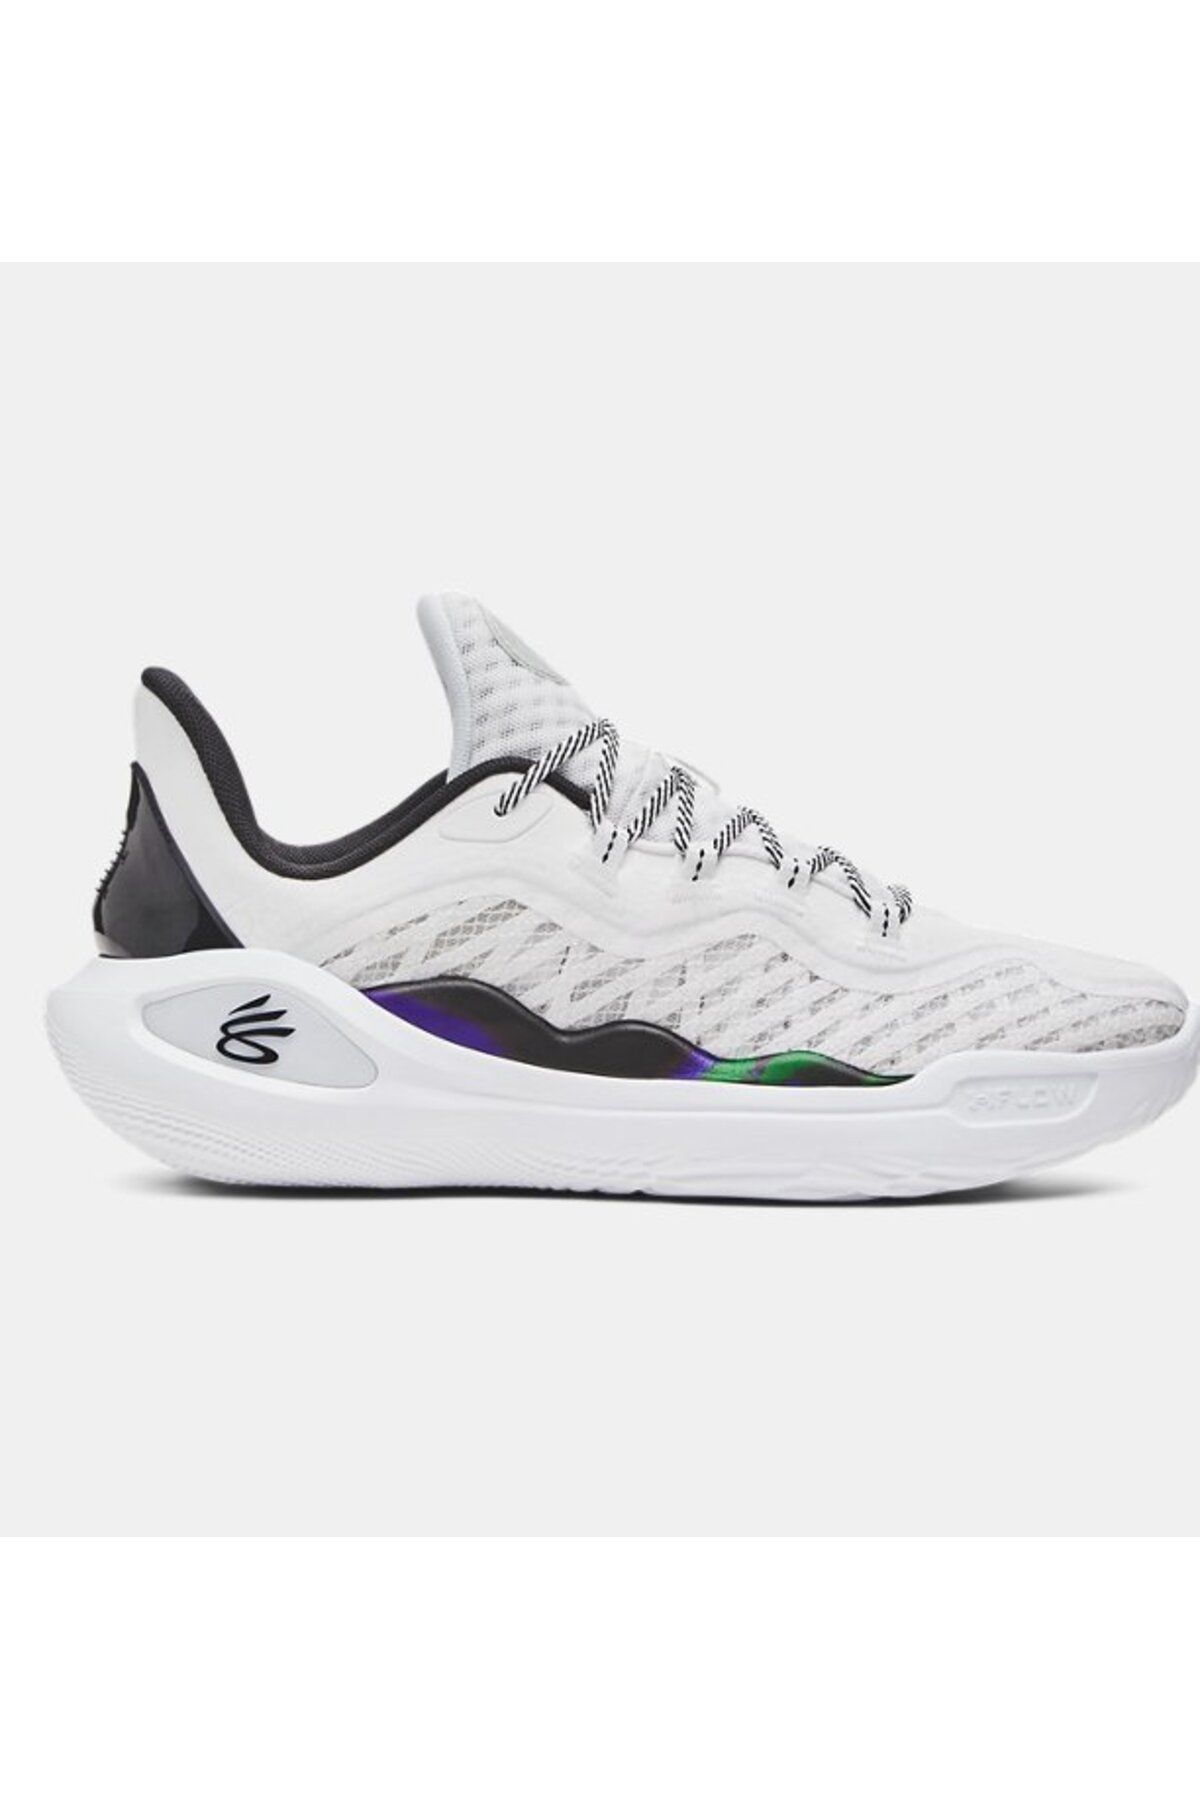 Under Armour CURRY 11 WIND 3027502-100